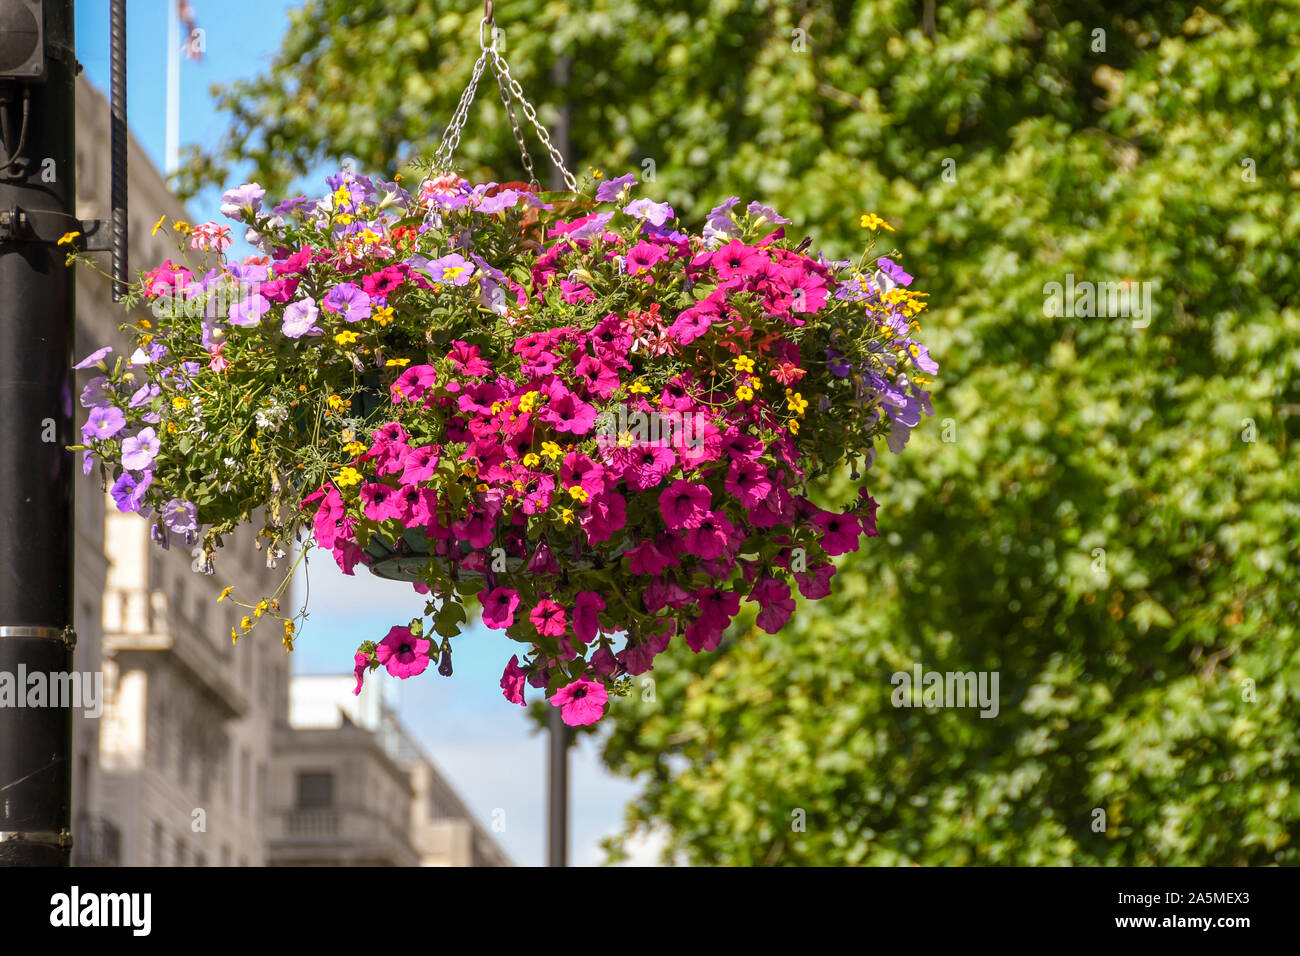 LONDON, ENGLAND - JULY 2018: Flower basket hanging from a lamp post in Central London. Stock Photo